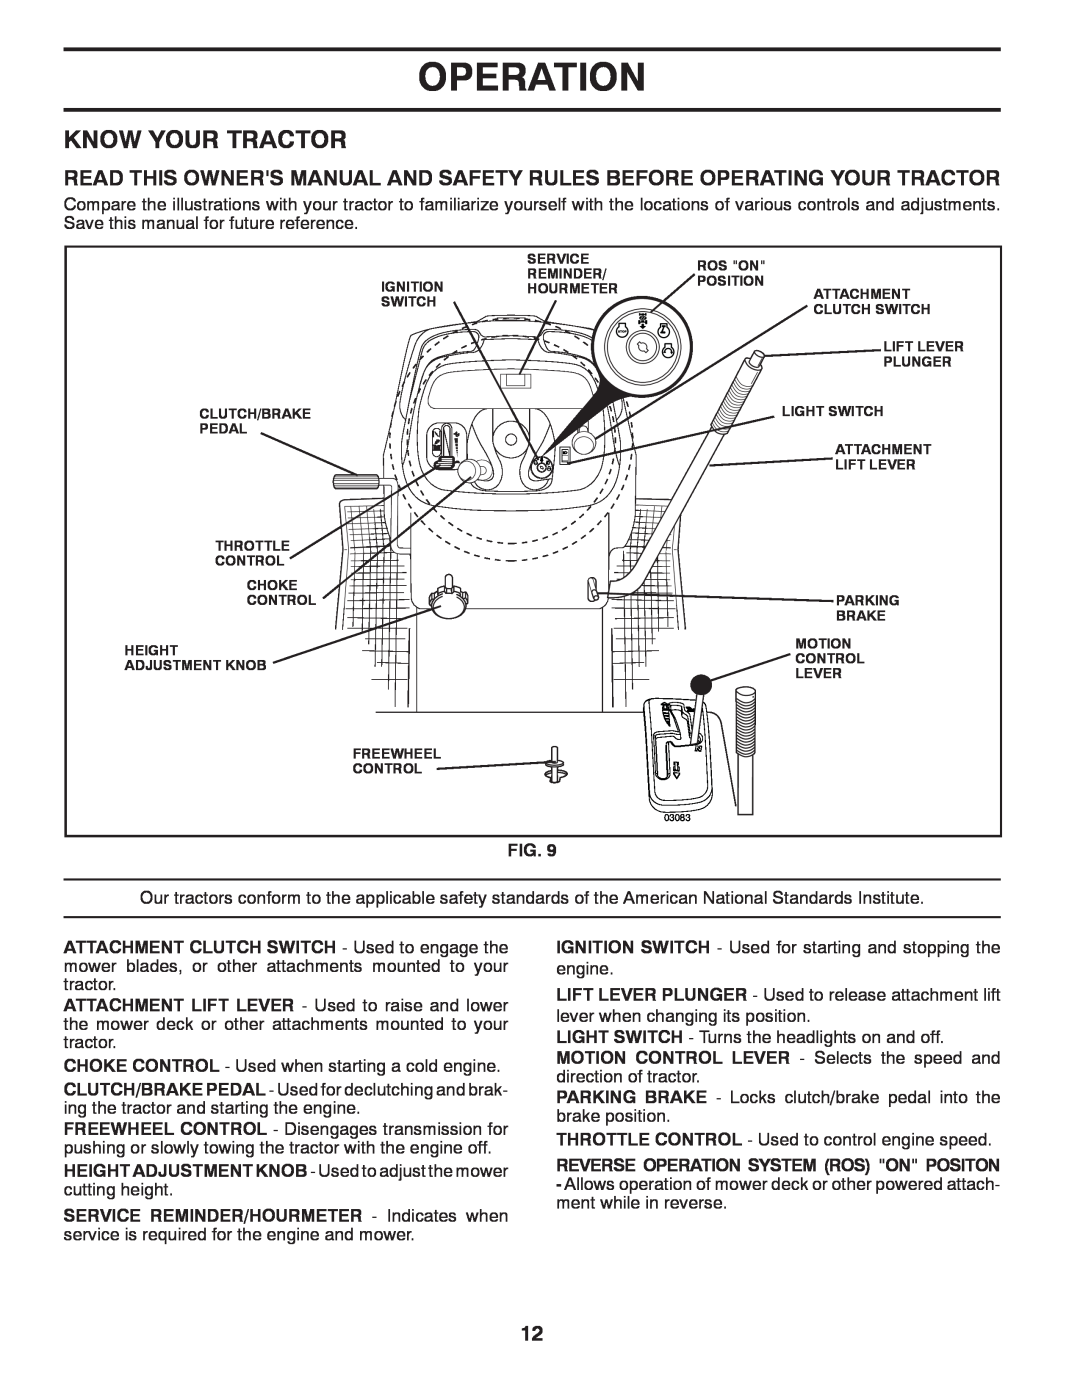 Husqvarna CTH2036 TWIN owner manual Know Your Tractor, Operation 